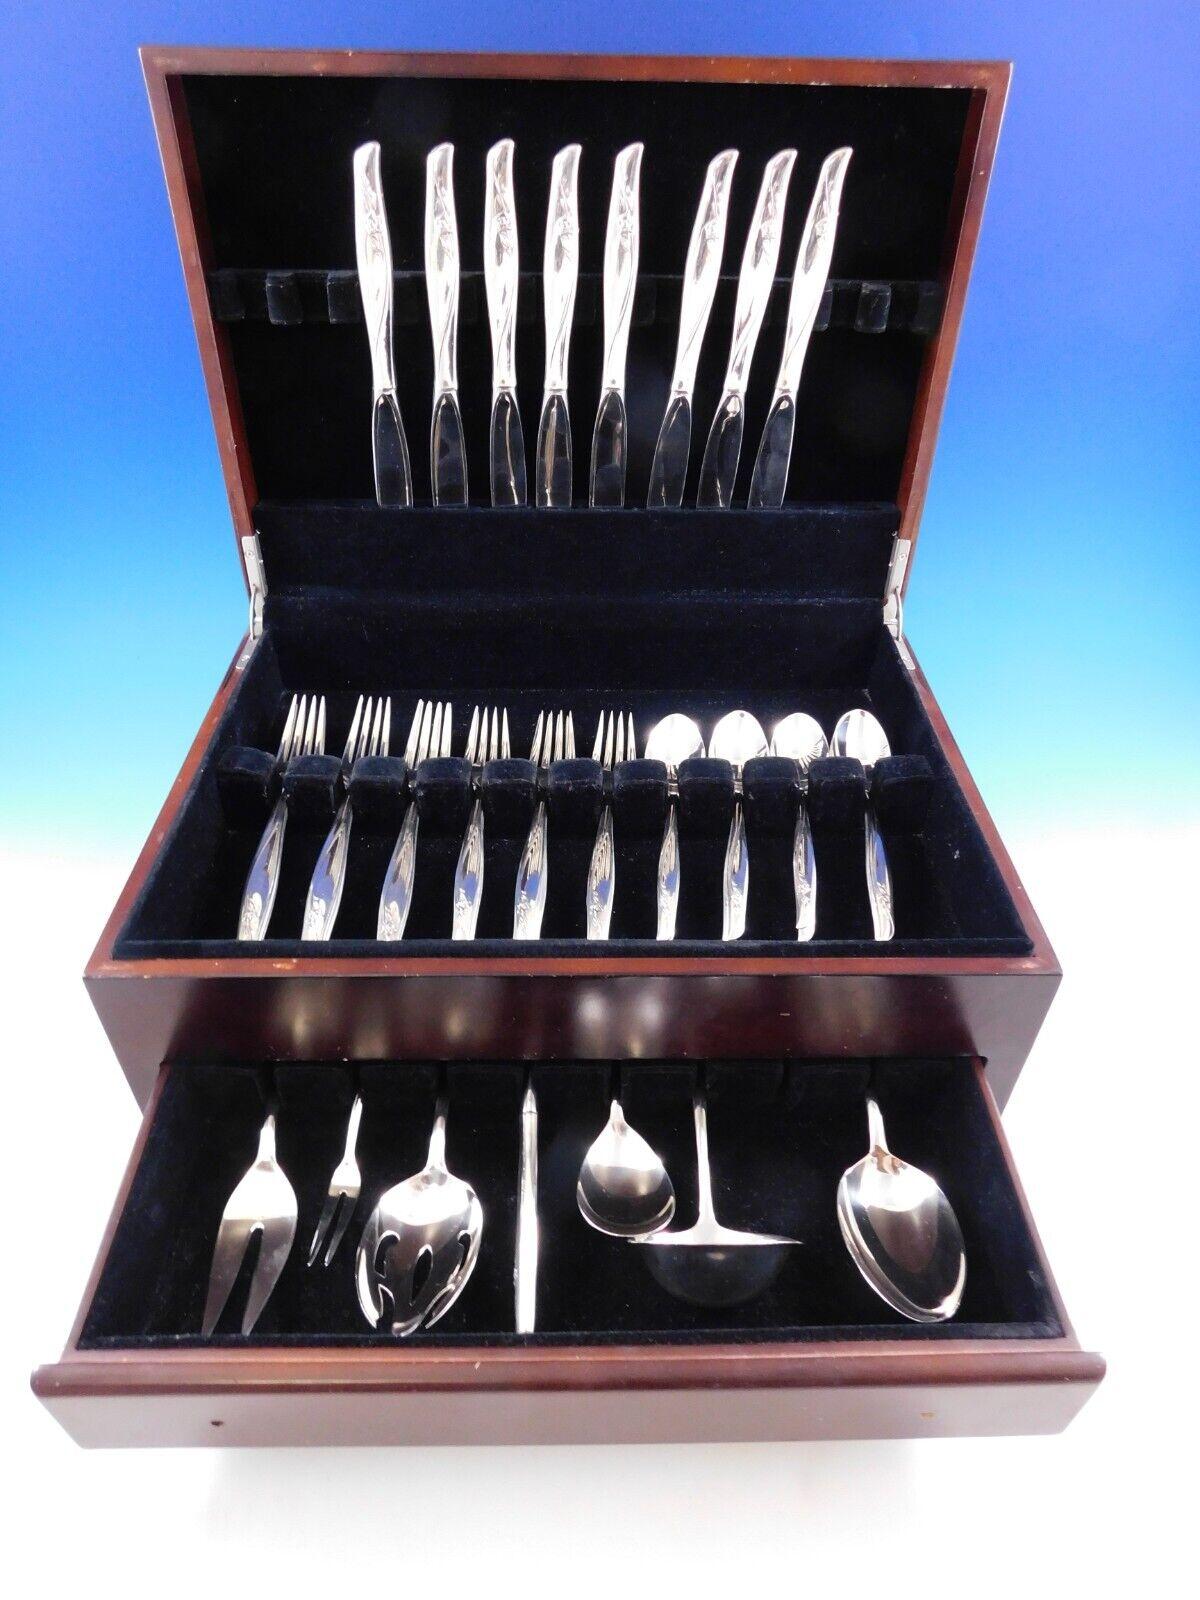 Beautiful Sea Rose By Gorham sterling silver Flatware set, 63 pieces. This pattern has a flowing modern design and was designed by Richard L. Huggins in the year 1958. This set includes:
 
·         8 Knives, 9 1/4